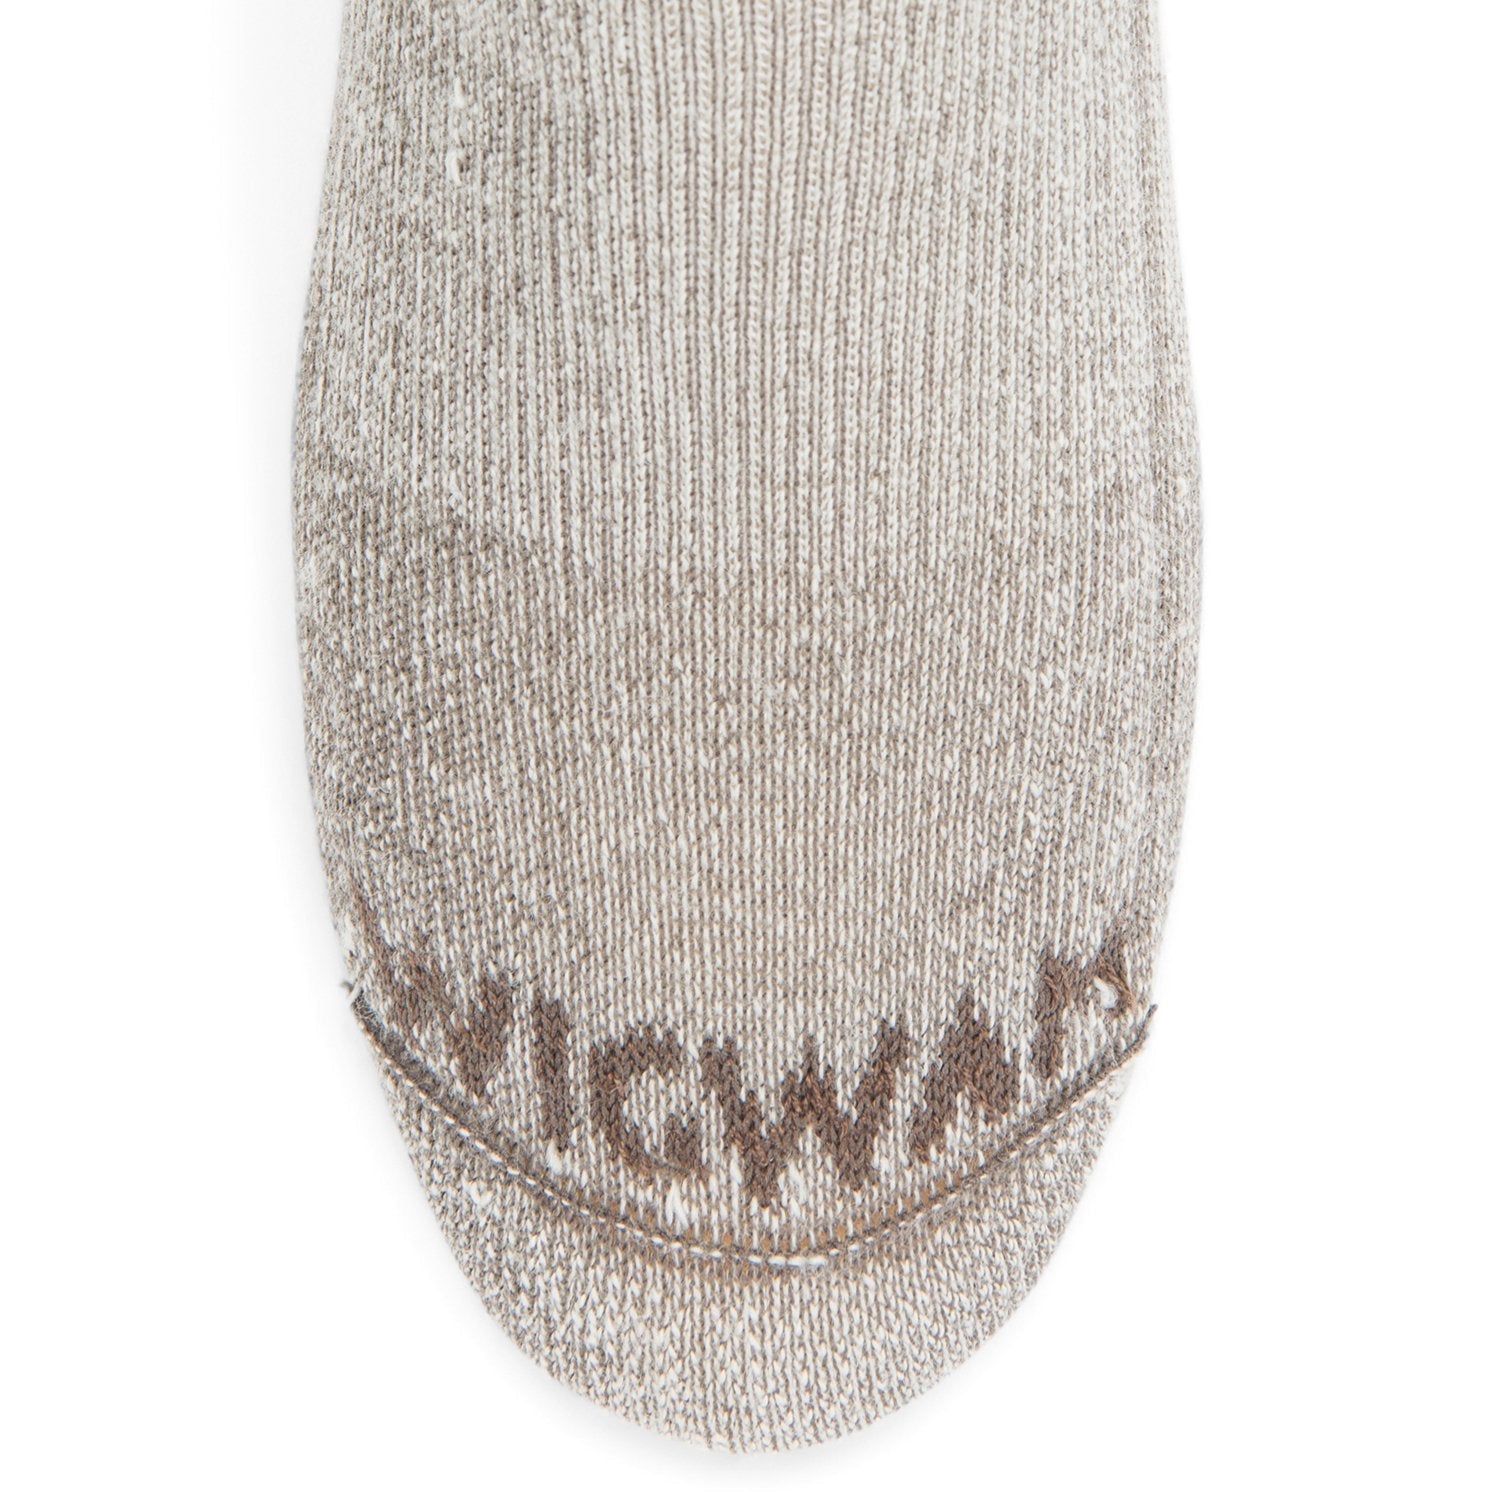 Merino Comfort Hiker Midweight Crew Sock - Taupe toe perspective - made in The USA Wigwam Socks